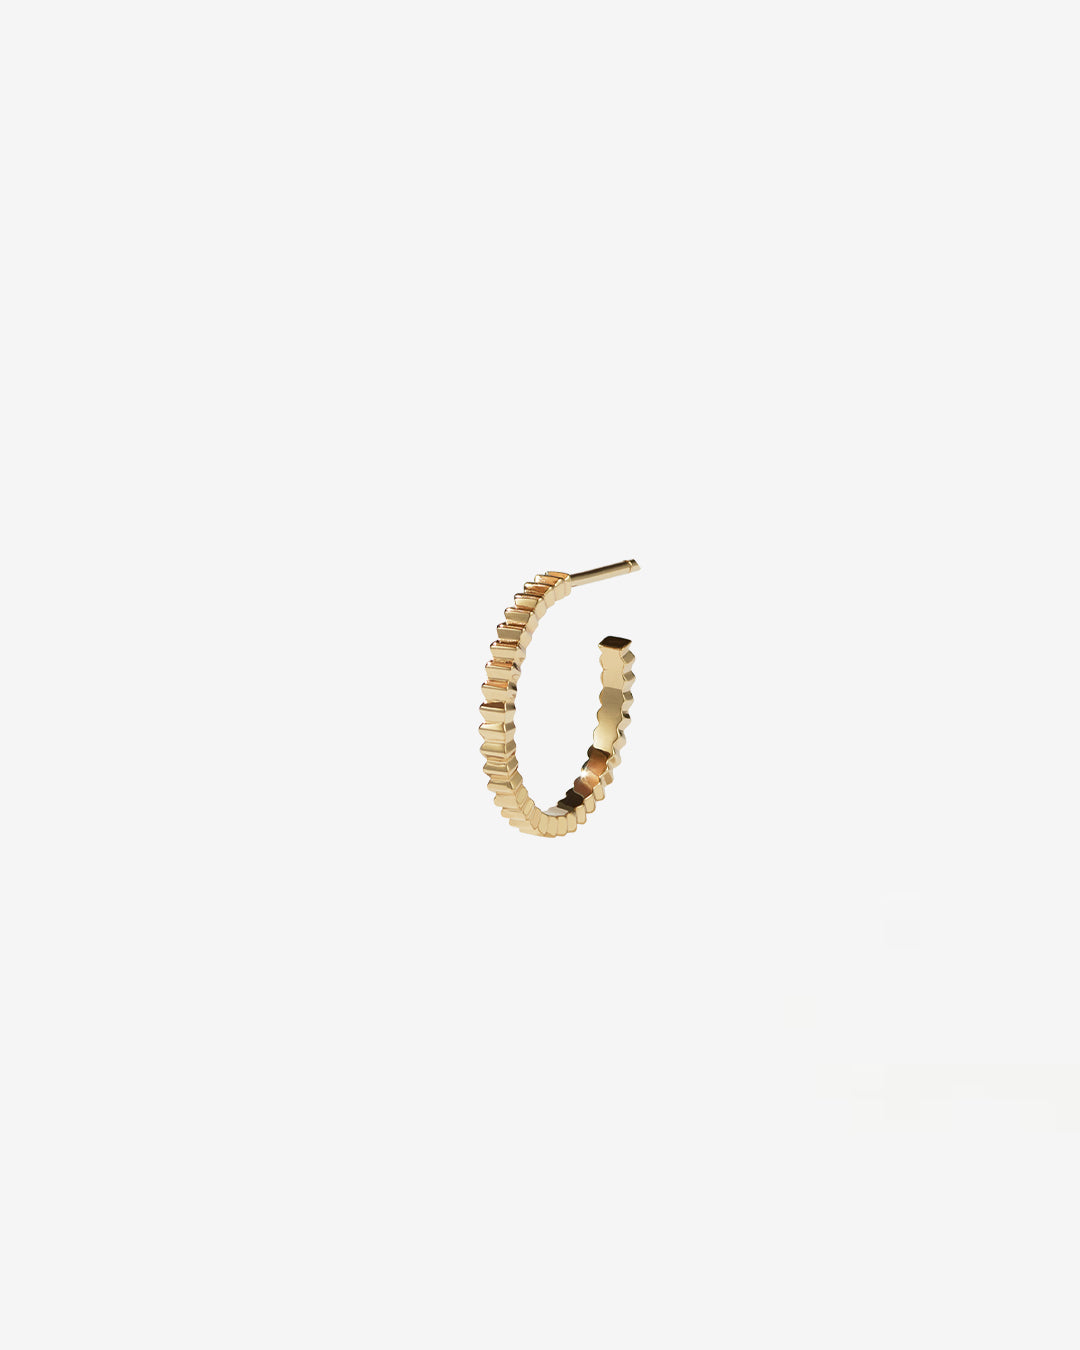 Solaire Hoops Medium Single Earring | 9ct Solid Gold